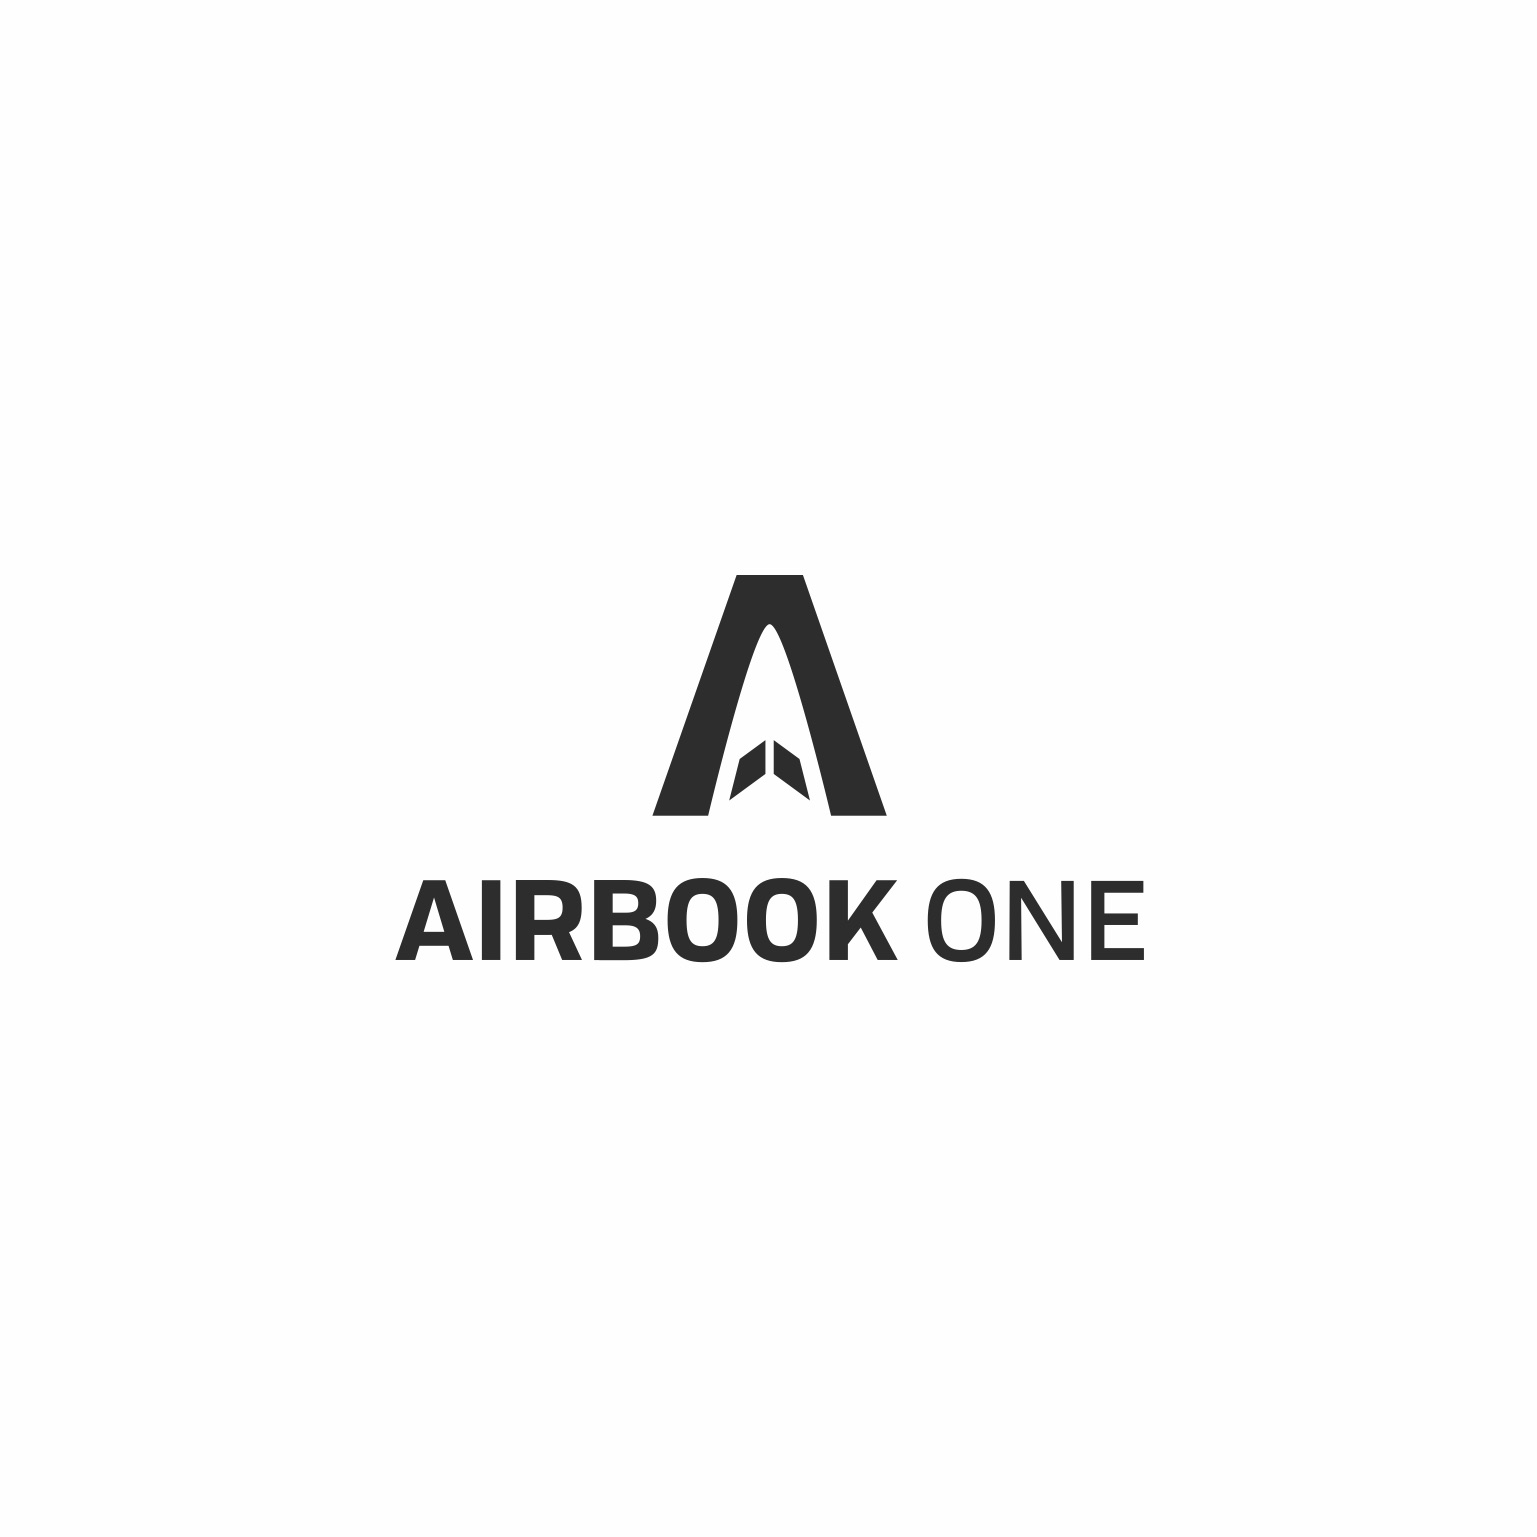 AIRBOOK ONE Set to D